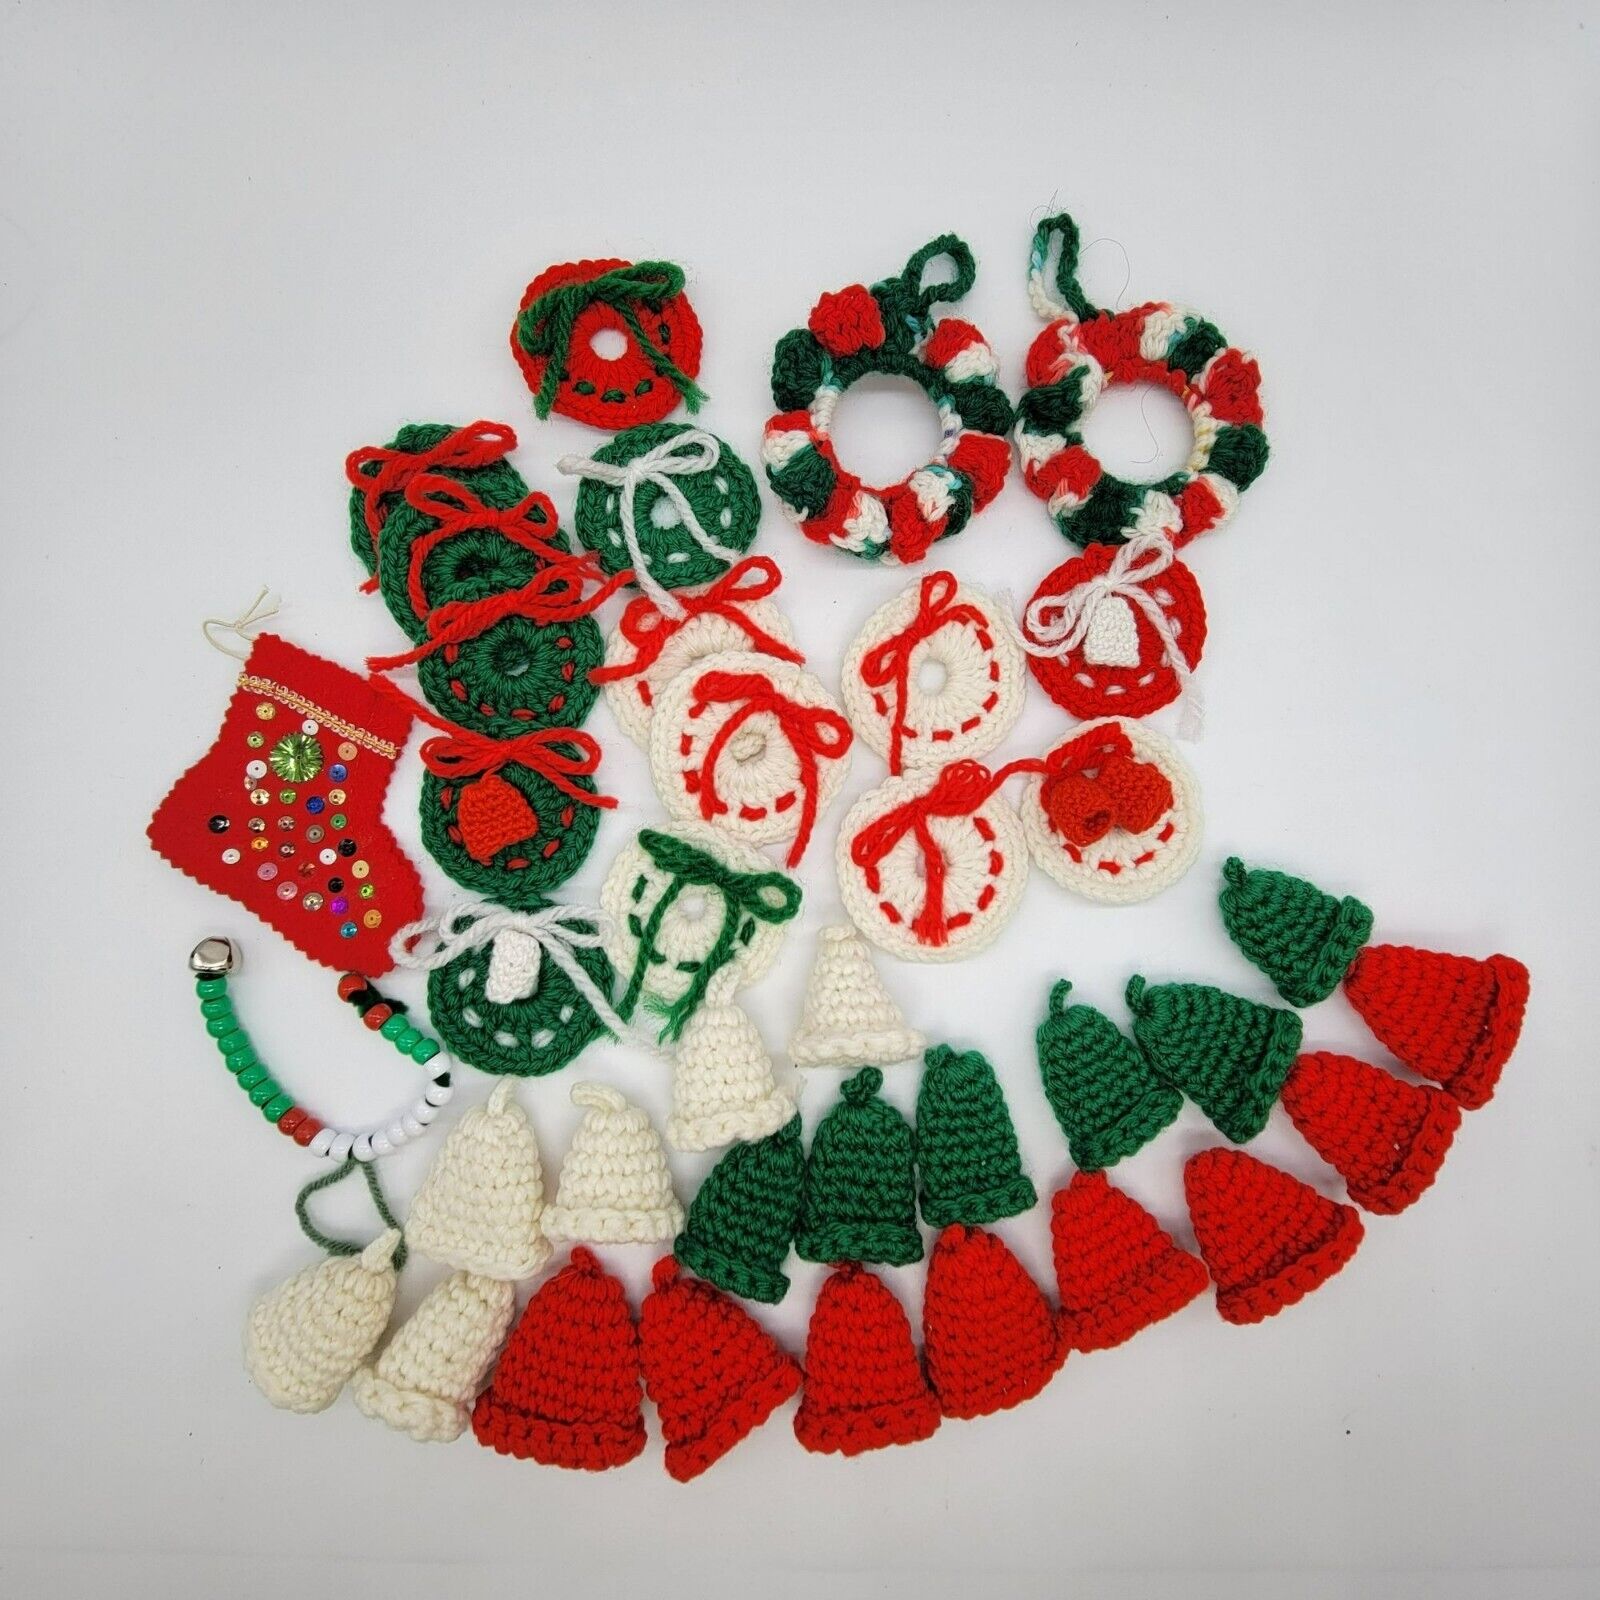 1970s Christmas 38 pc. Knitted Yarn Ornaments Bells Wreaths Red Green White